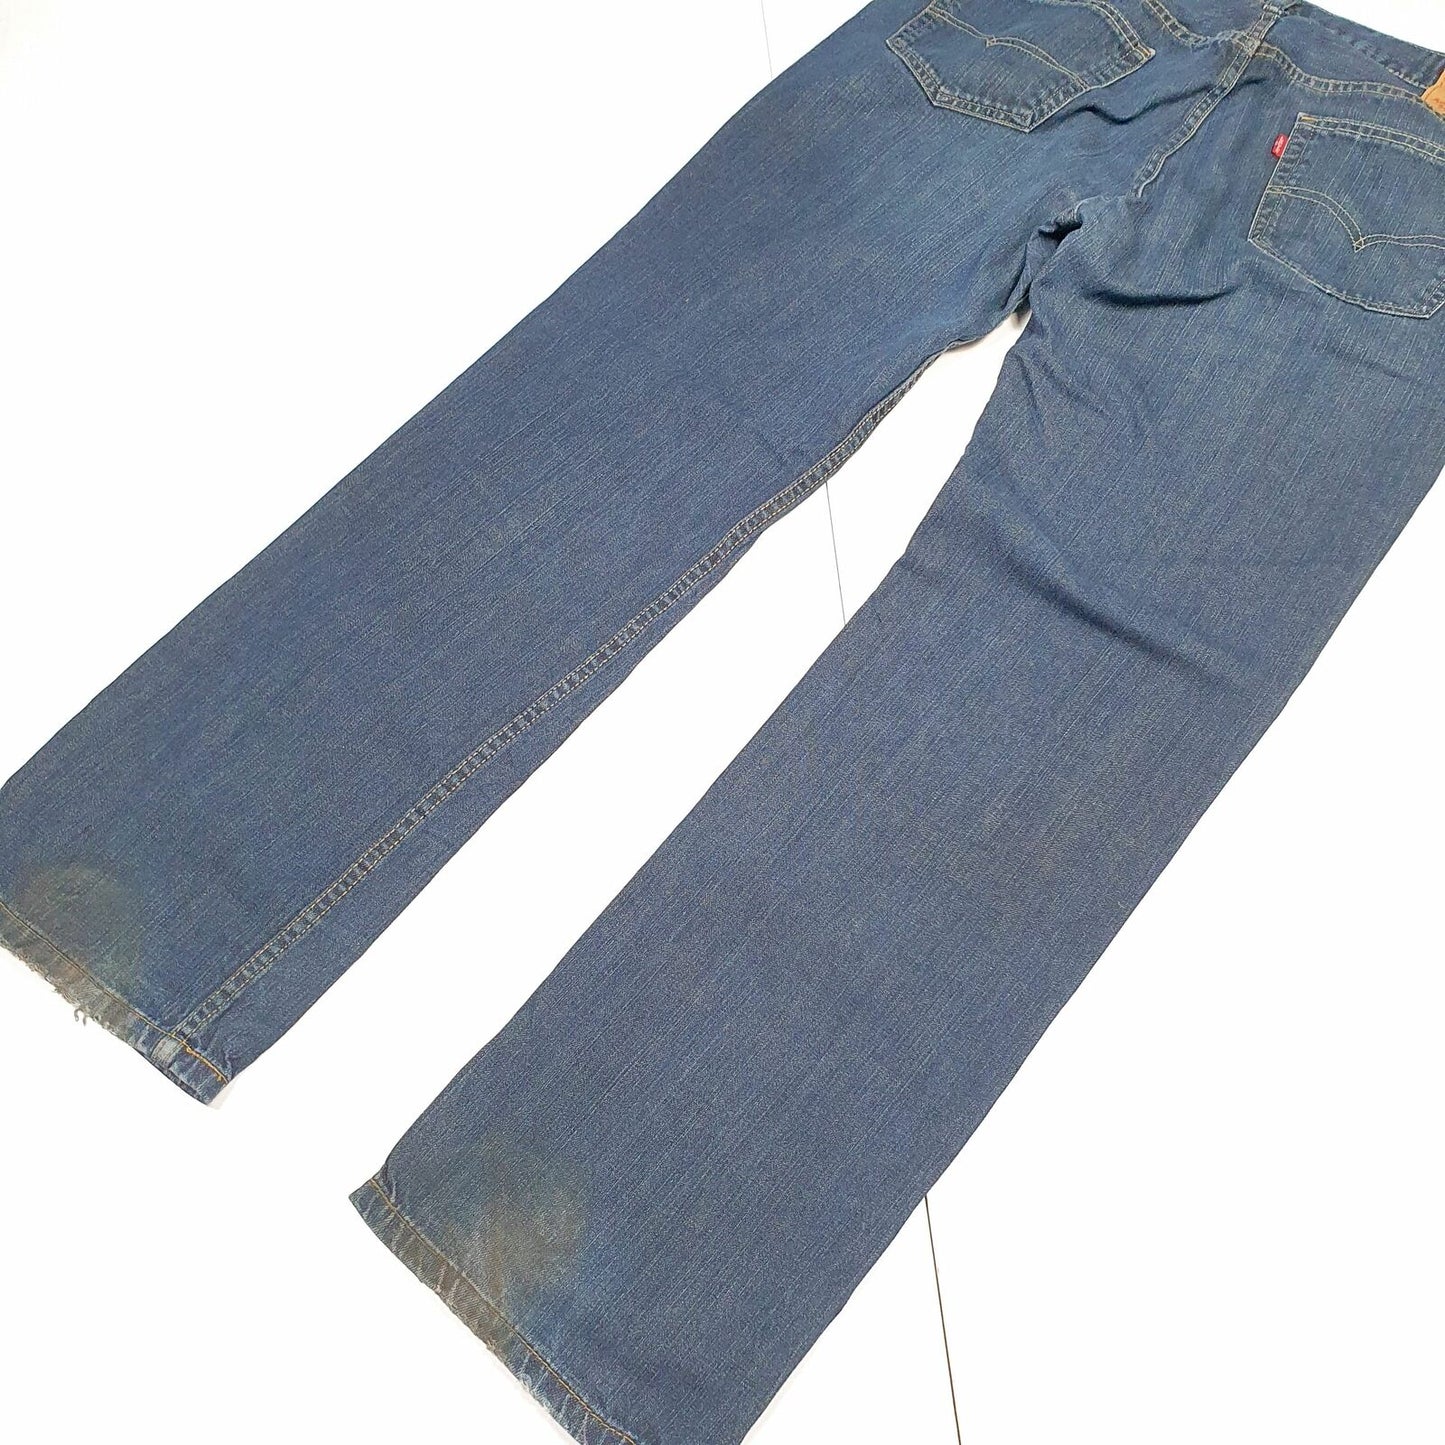 Mens LEVI'S Blue Denim 559 Relaxed Straight Fit Jeans Trousers W36 L34